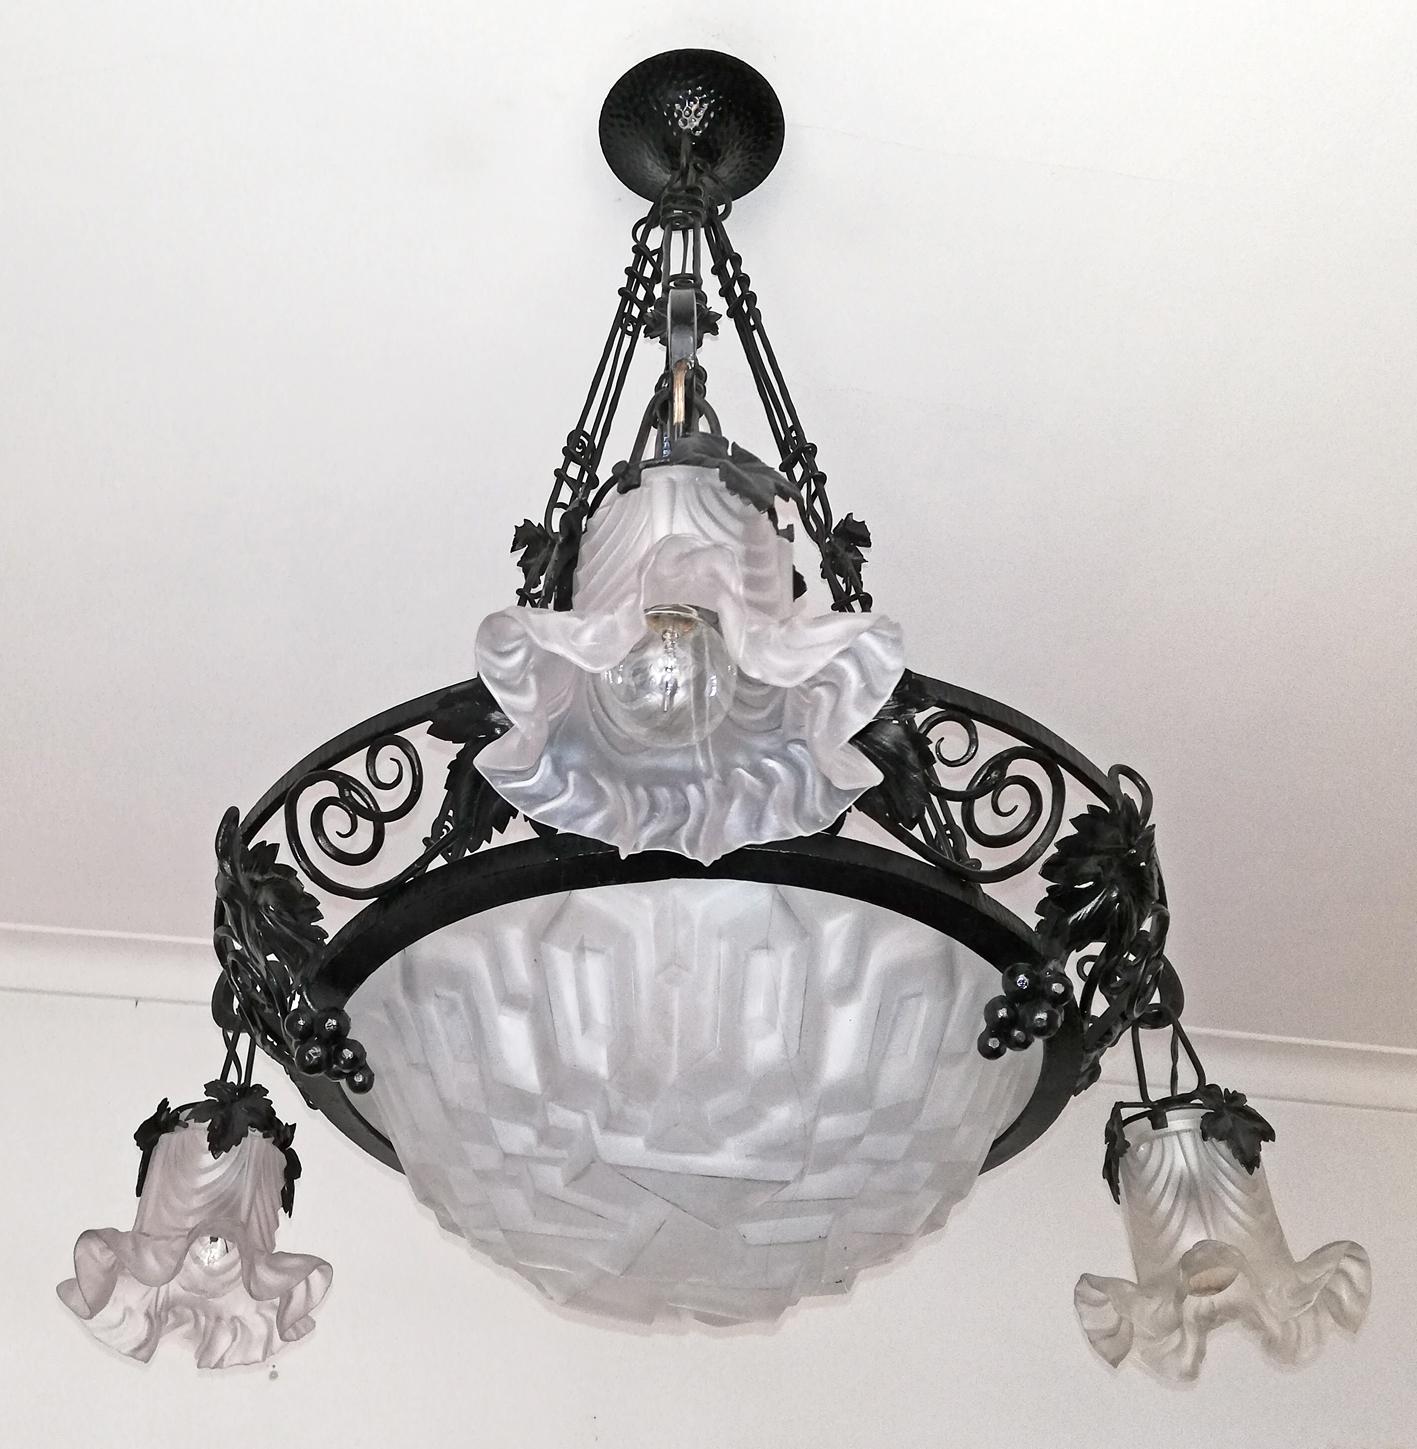 Beautiful original  French Art Deco ceiling lamp by David Guéron for Verrerie d'Art Degué, 1920s signed signed Degue. The hand forged wrought iron frame features intricately hand forged grape and leaf accents. 
 
Measures:
Width 30 in / 76 cm
Height